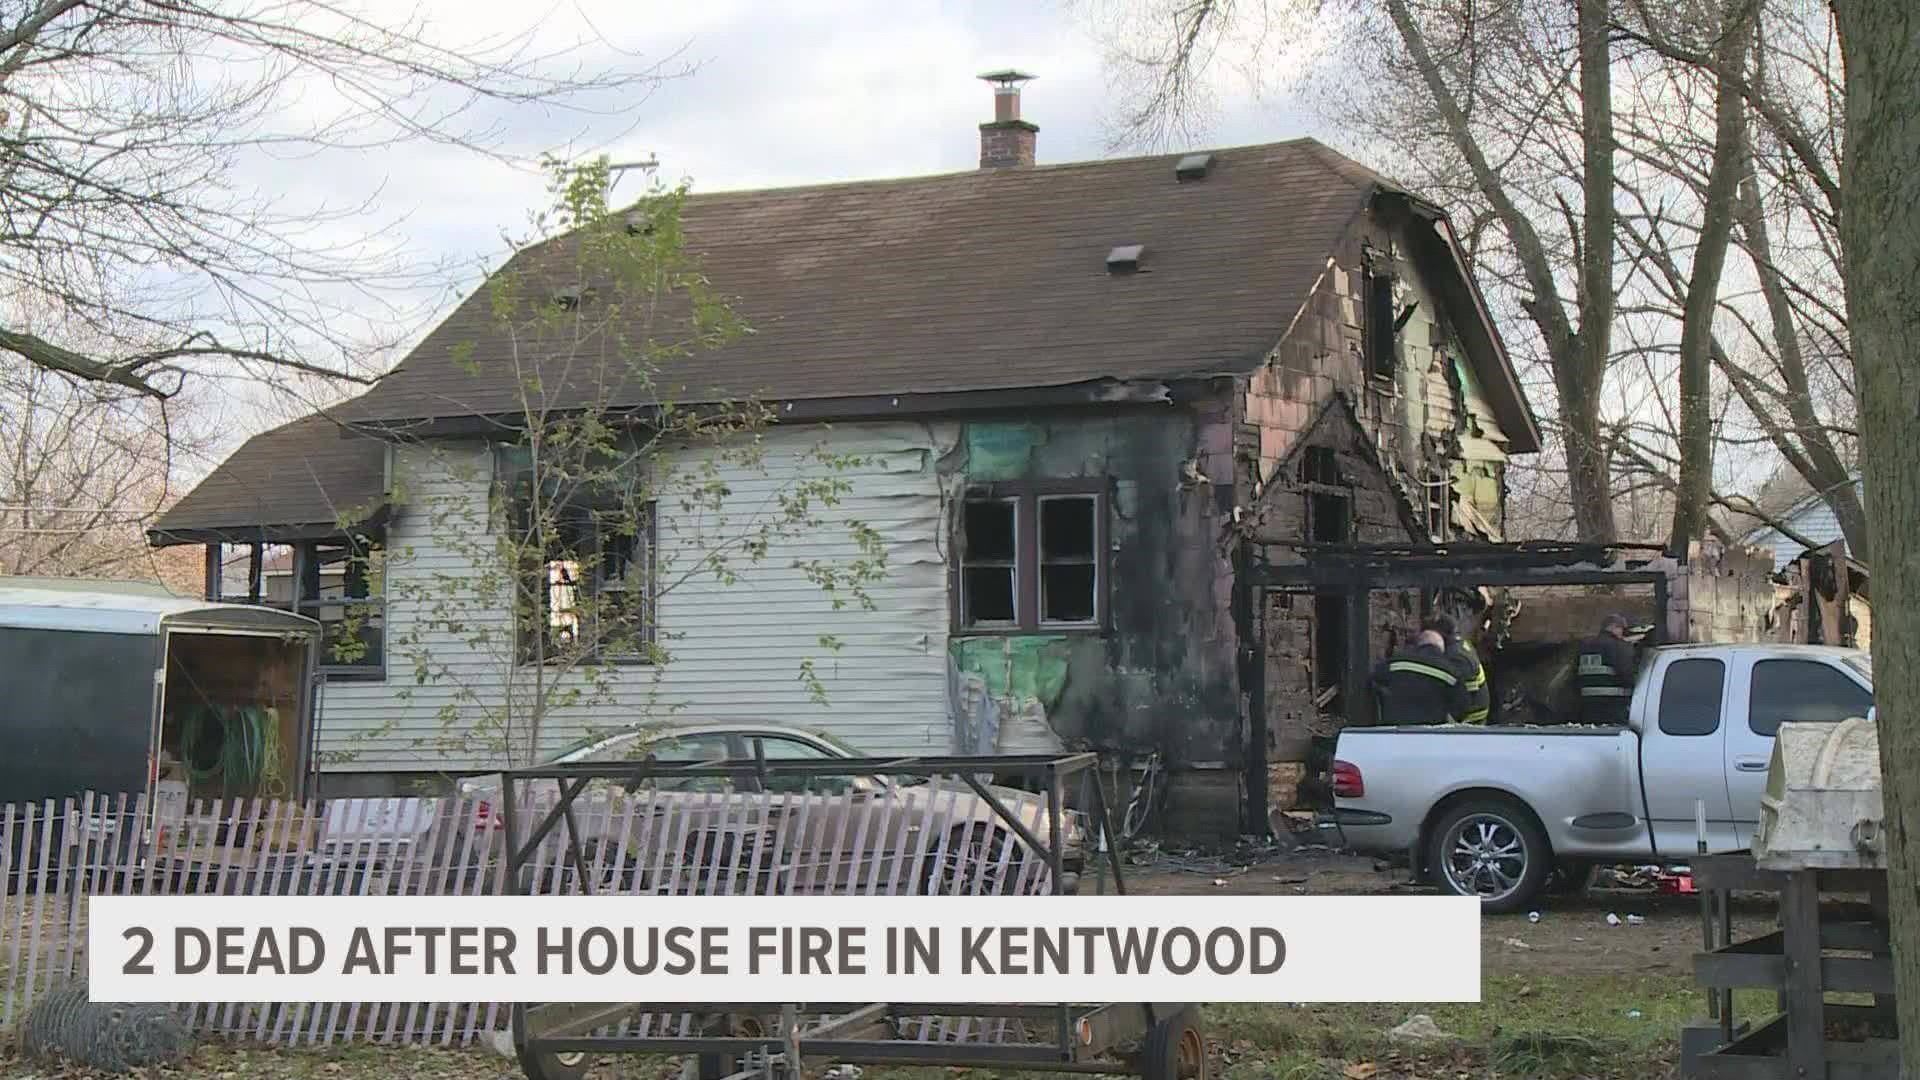 A 12-year-old girl and 19-year-old woman died at the scene of a Kentwood home that caught fire early Monday morning, Kentwood Police said.